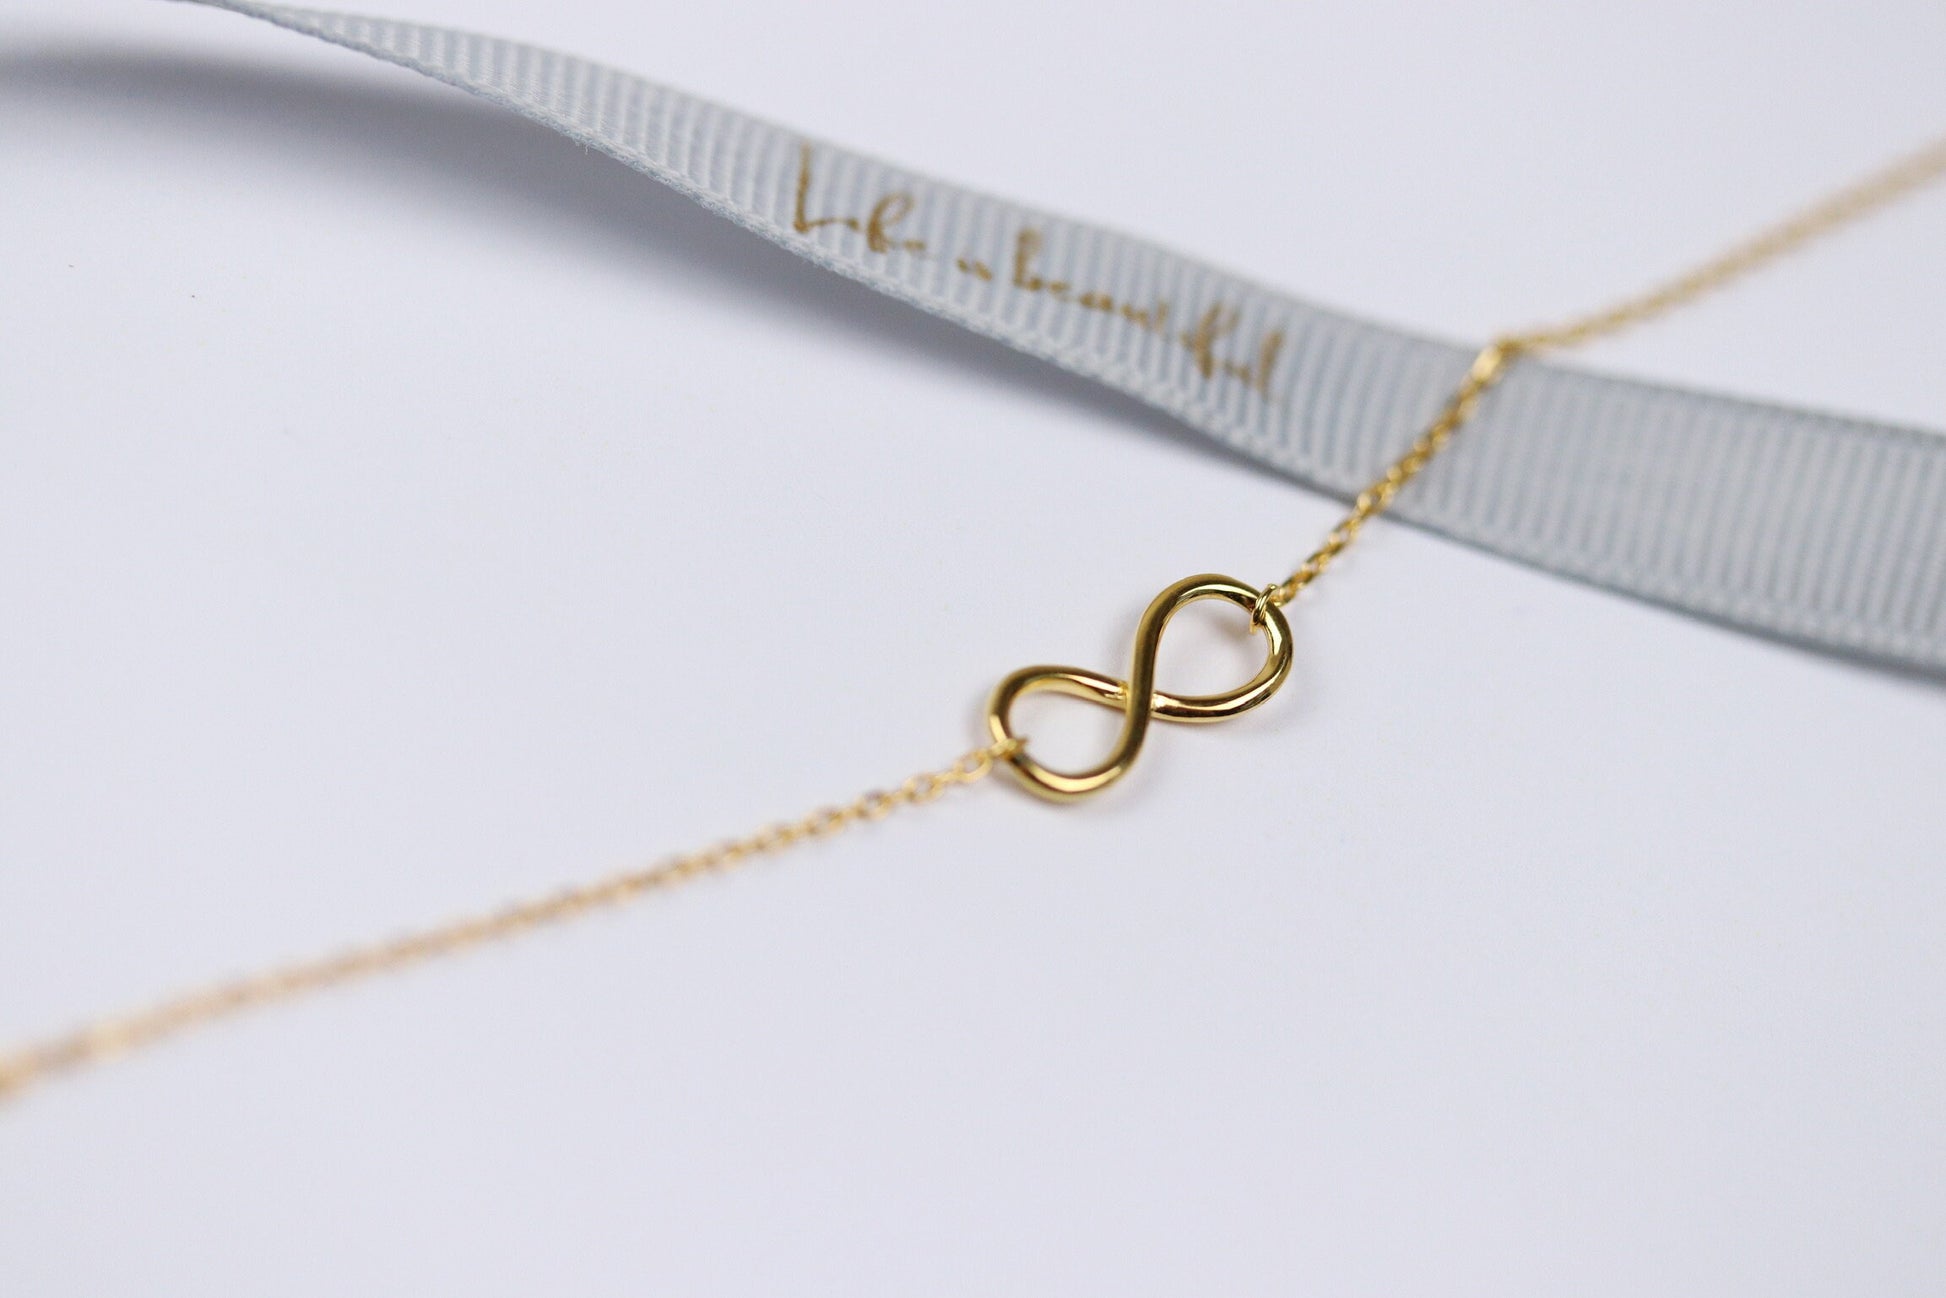 Flower Girl Gift / Wedding Thank You Gift / Infinity Necklace / Gold Dainty Necklace Jewelry Gift for Flower Girl, Keepsake Flower Girl Gift